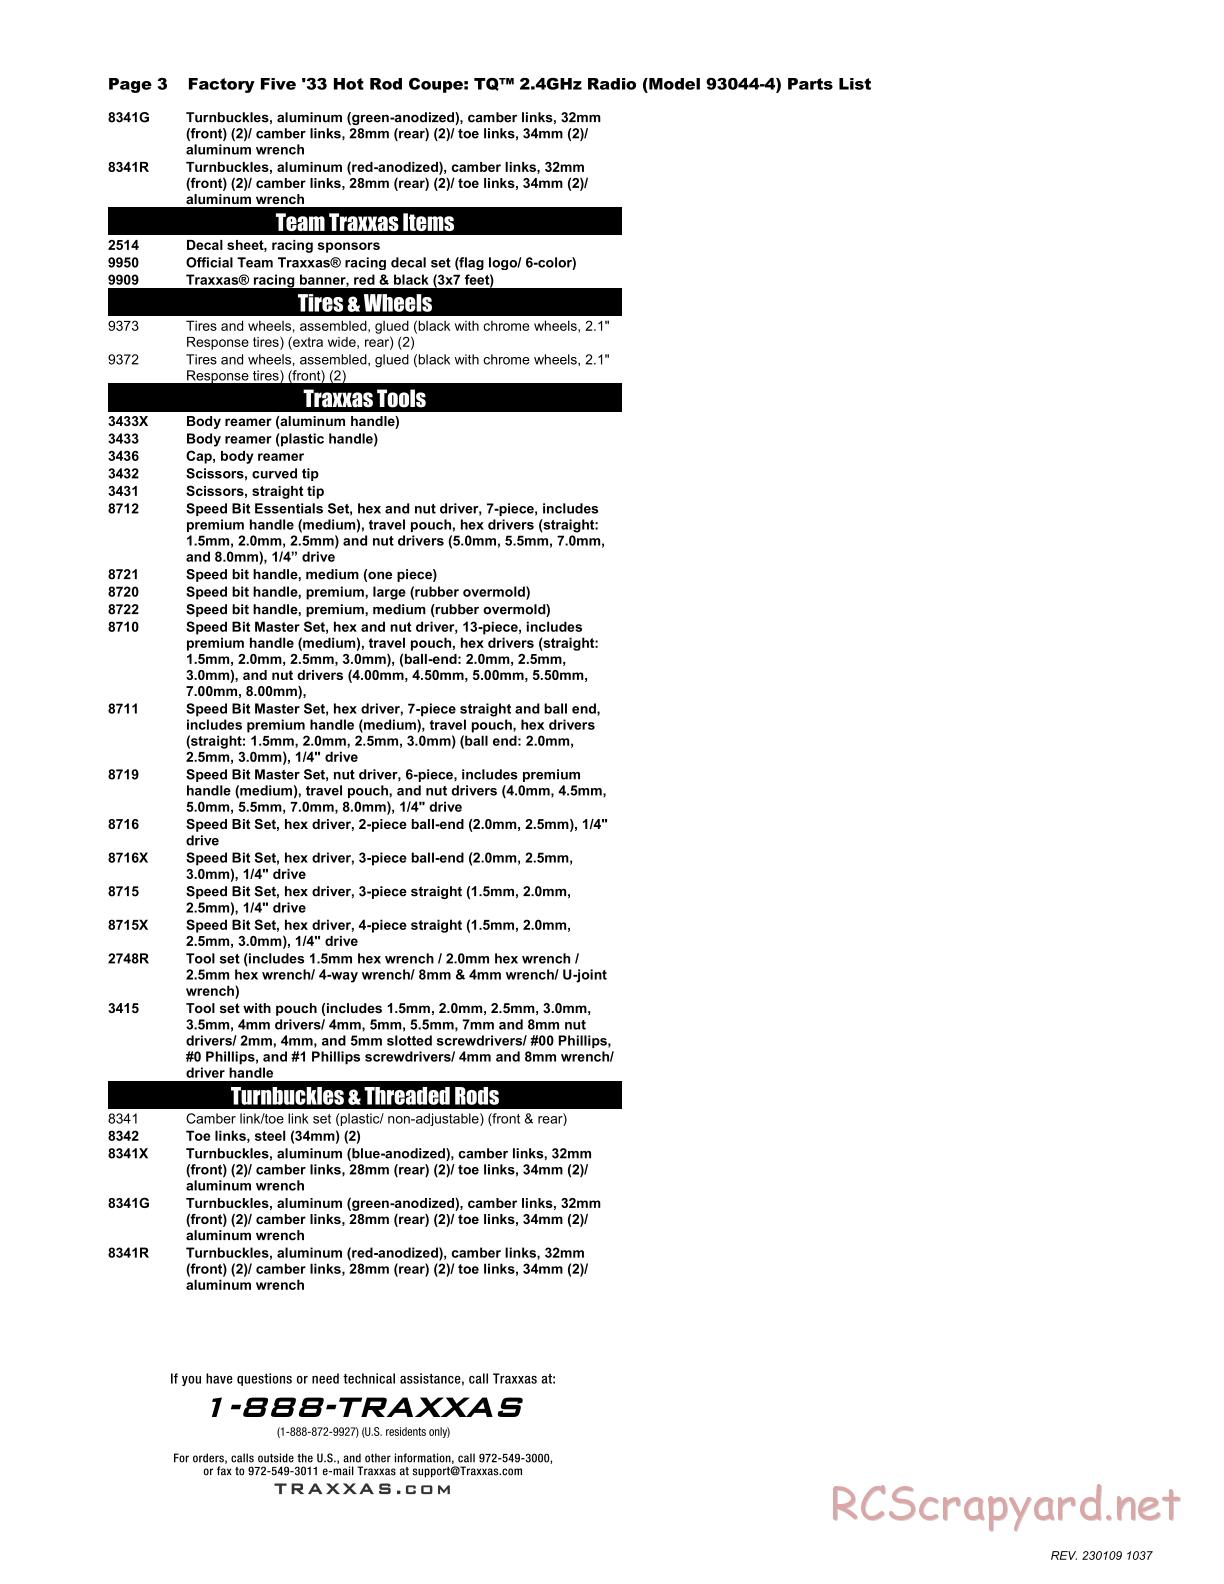 Traxxas - Hot Rod 1933 Coupe - Parts List - Page 3